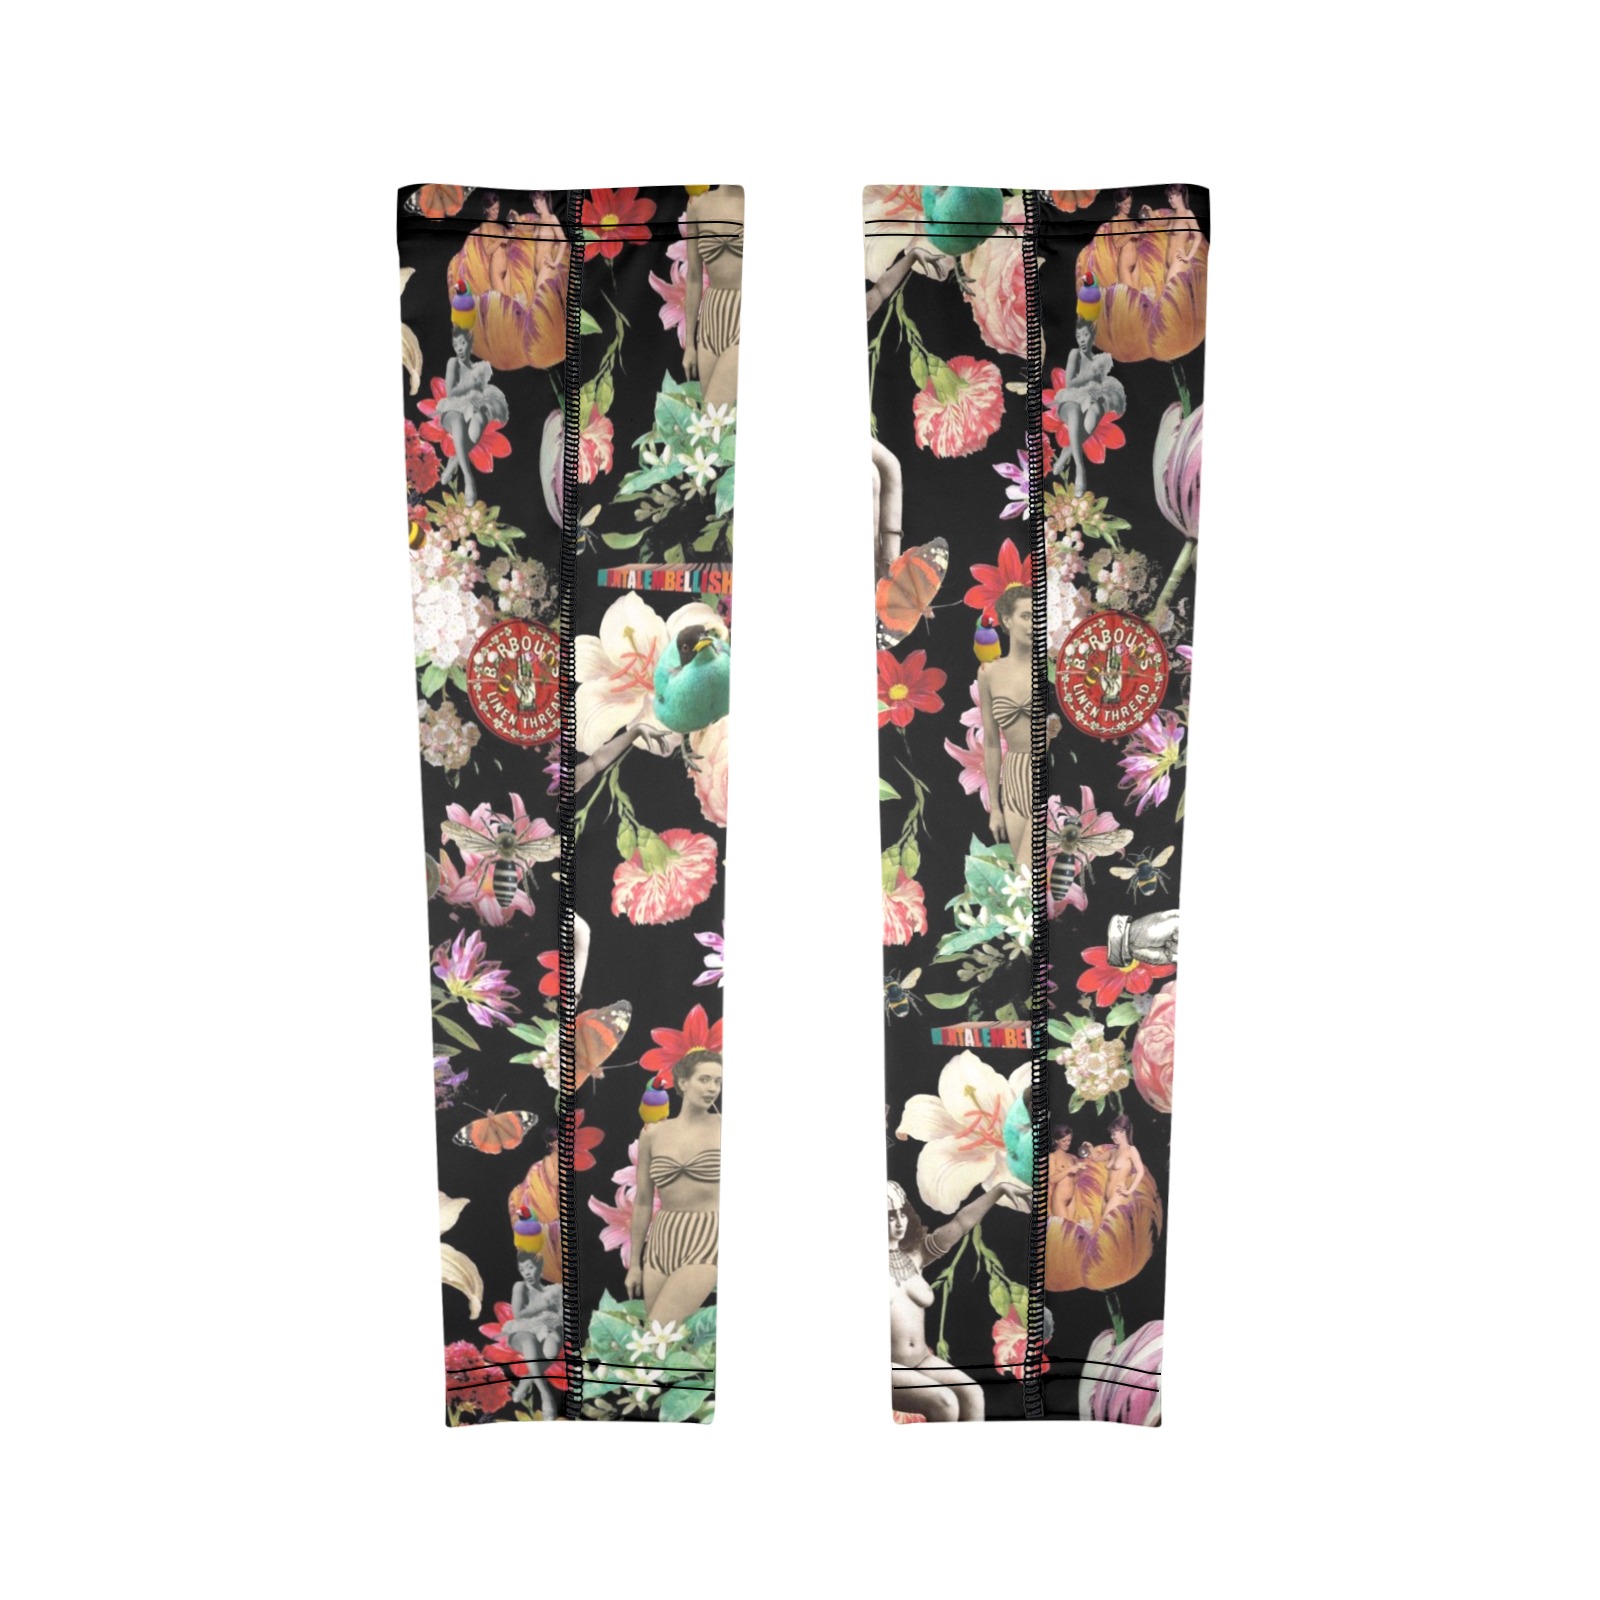 Garden Party Arm Sleeves (Set of Two with Different Printings)